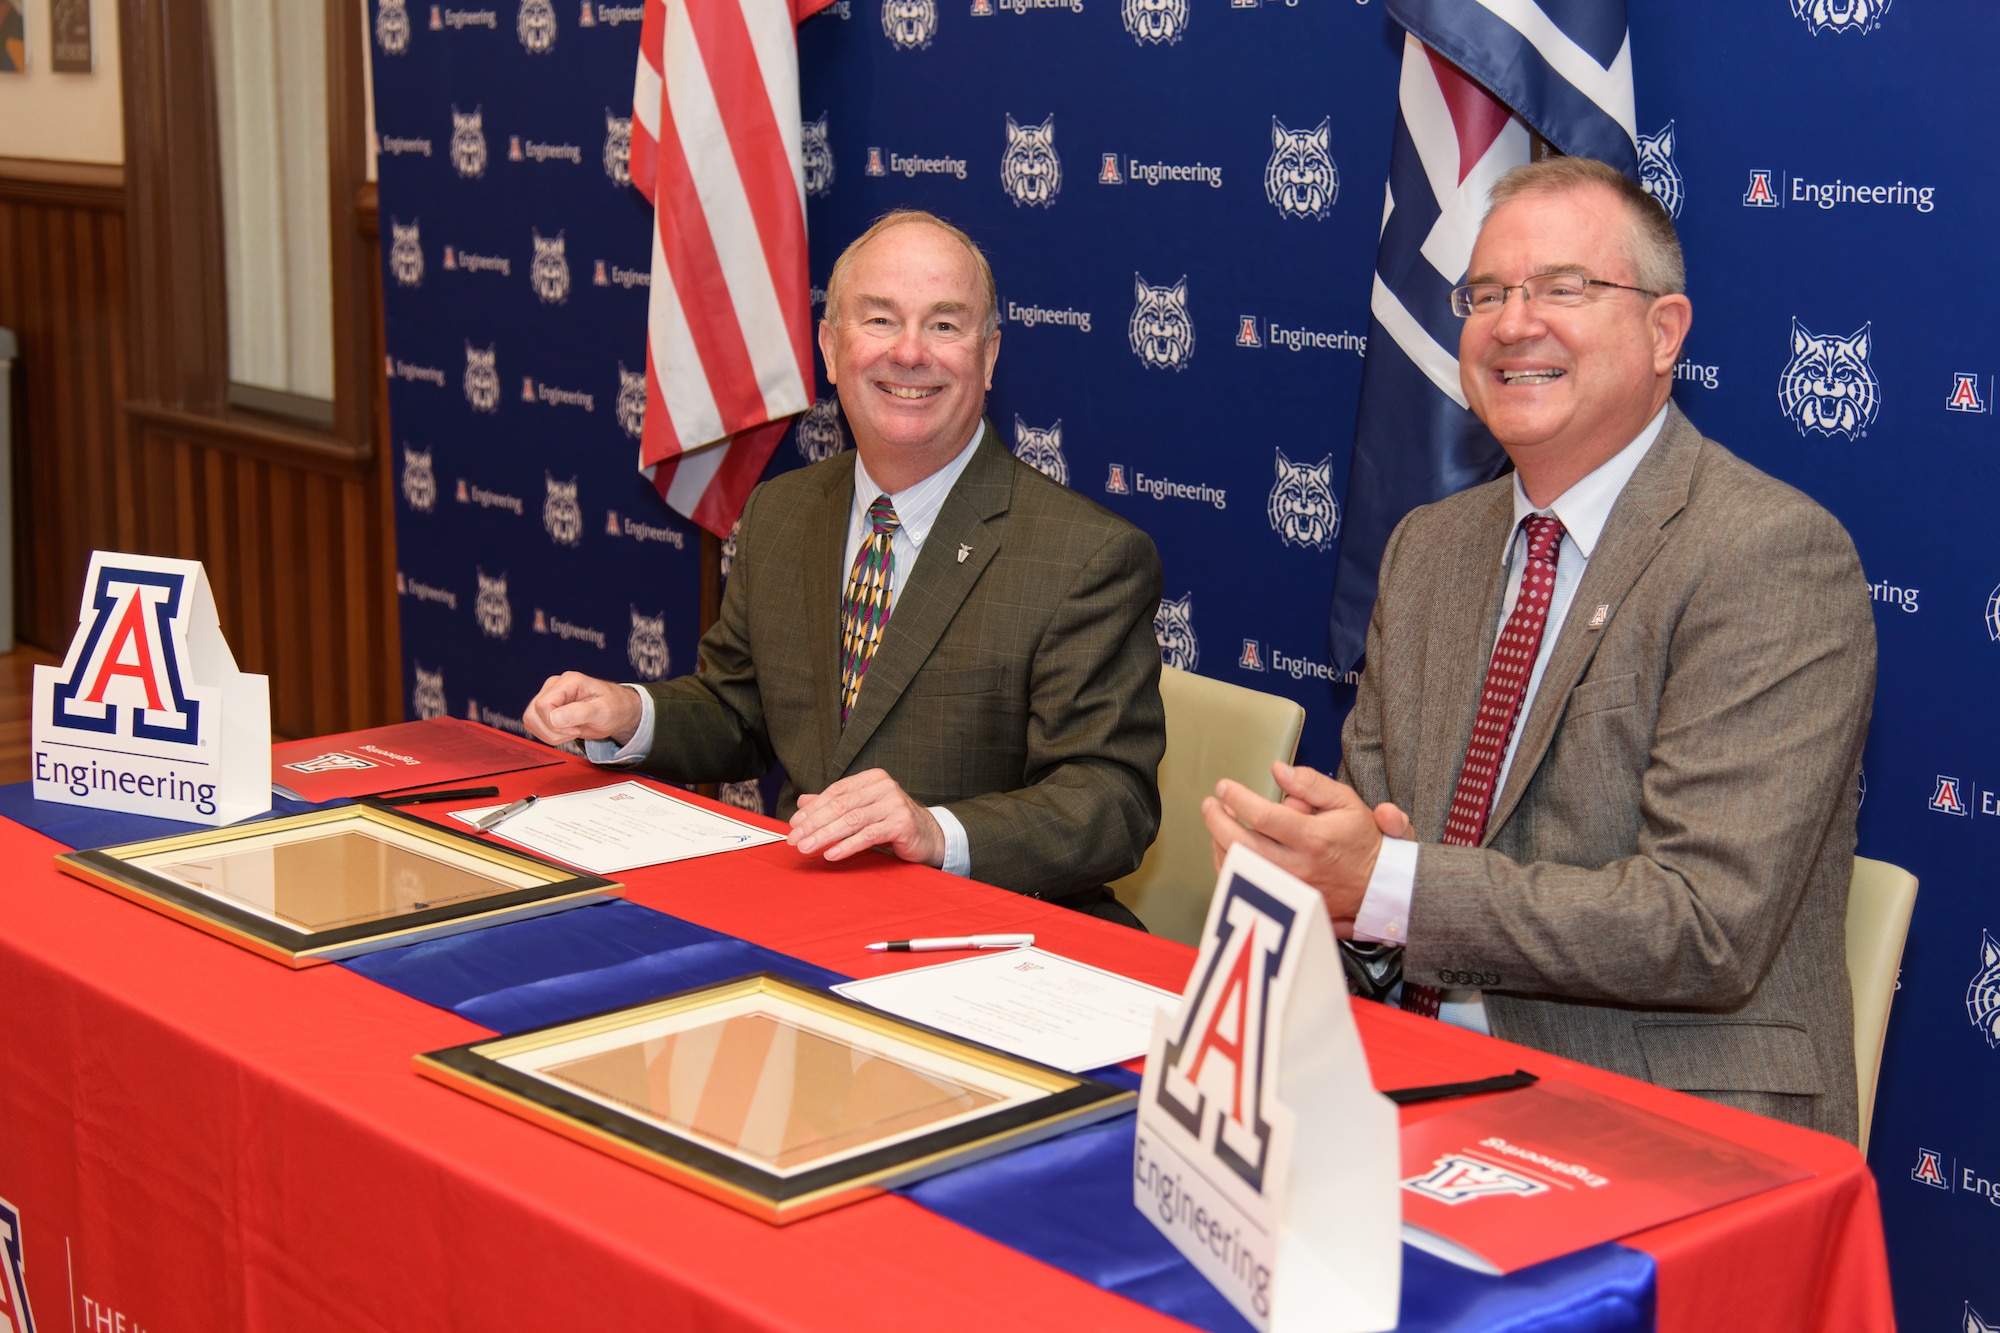 Edward Ayer, Air Force Sustainment Center, and and David Hahn, University of Arizona, sign an Education Partnership Agreement between Hill Air Force Base and the university that establishes collaborations for internships, Interdisciplinary Capstone projects, student training as part of the new Defense Civilian Training Corps program, and potentially faculty research.  (Photo by Kate Gardiner)